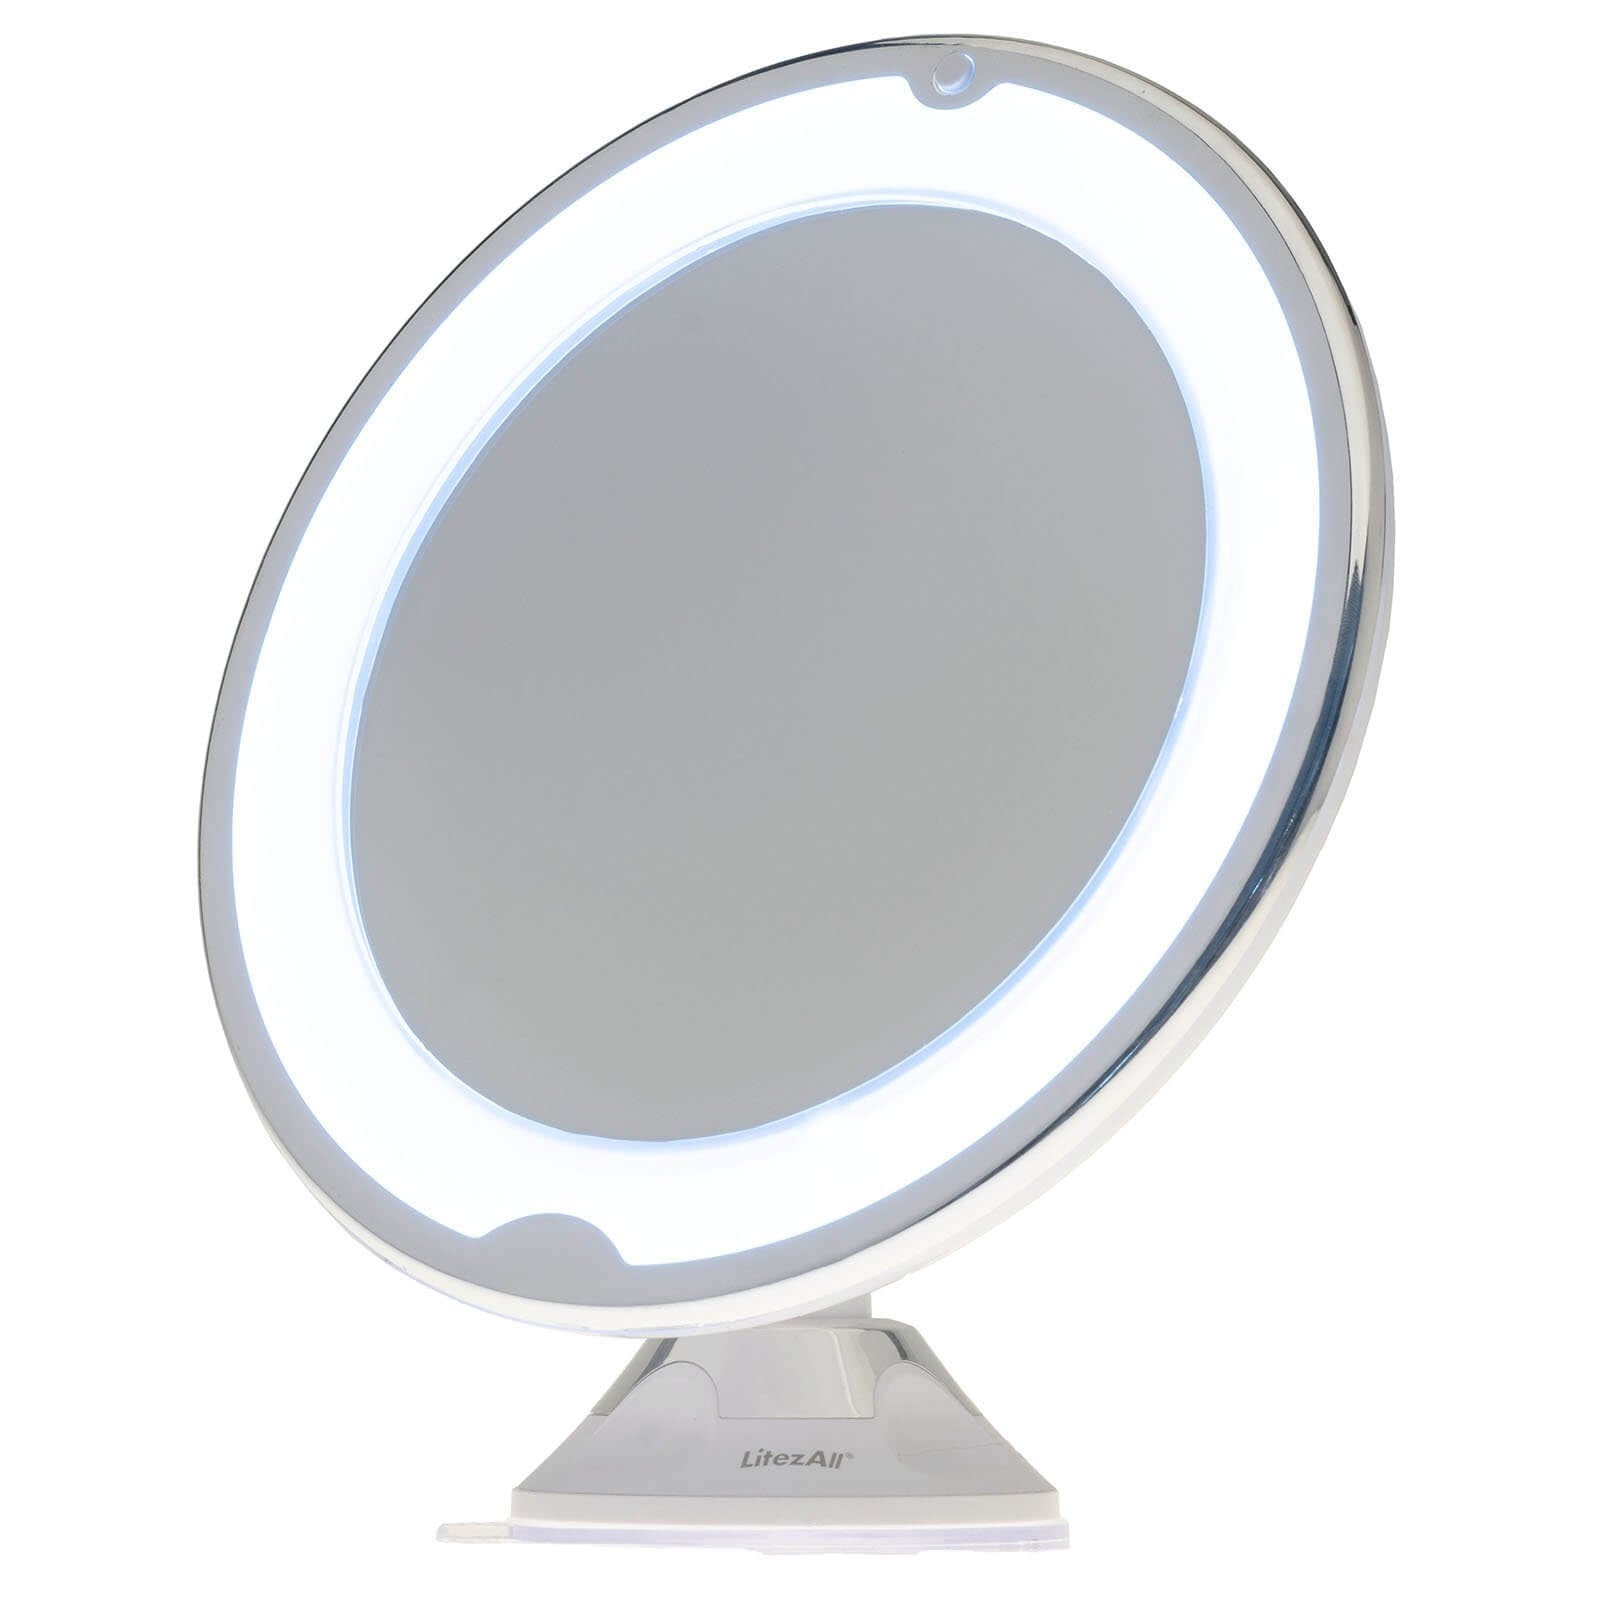 LitezAll Battery Powered Make-Up Mirror with Suction Cup Base - LitezAll - Wireless Lighting Solutions - 1